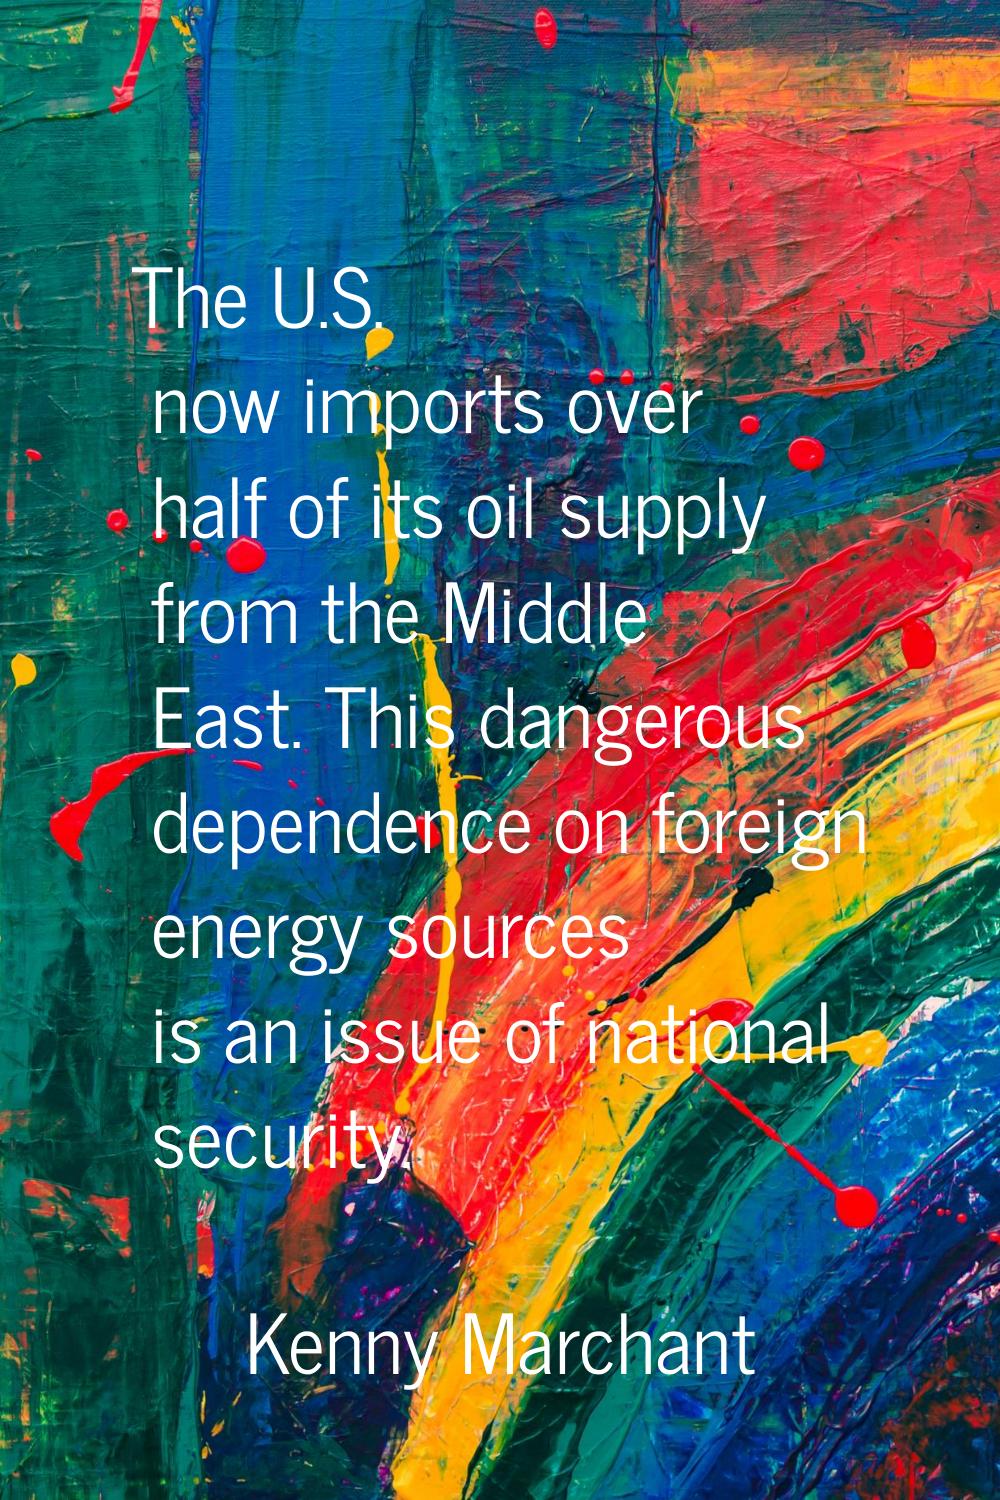 The U.S. now imports over half of its oil supply from the Middle East. This dangerous dependence on